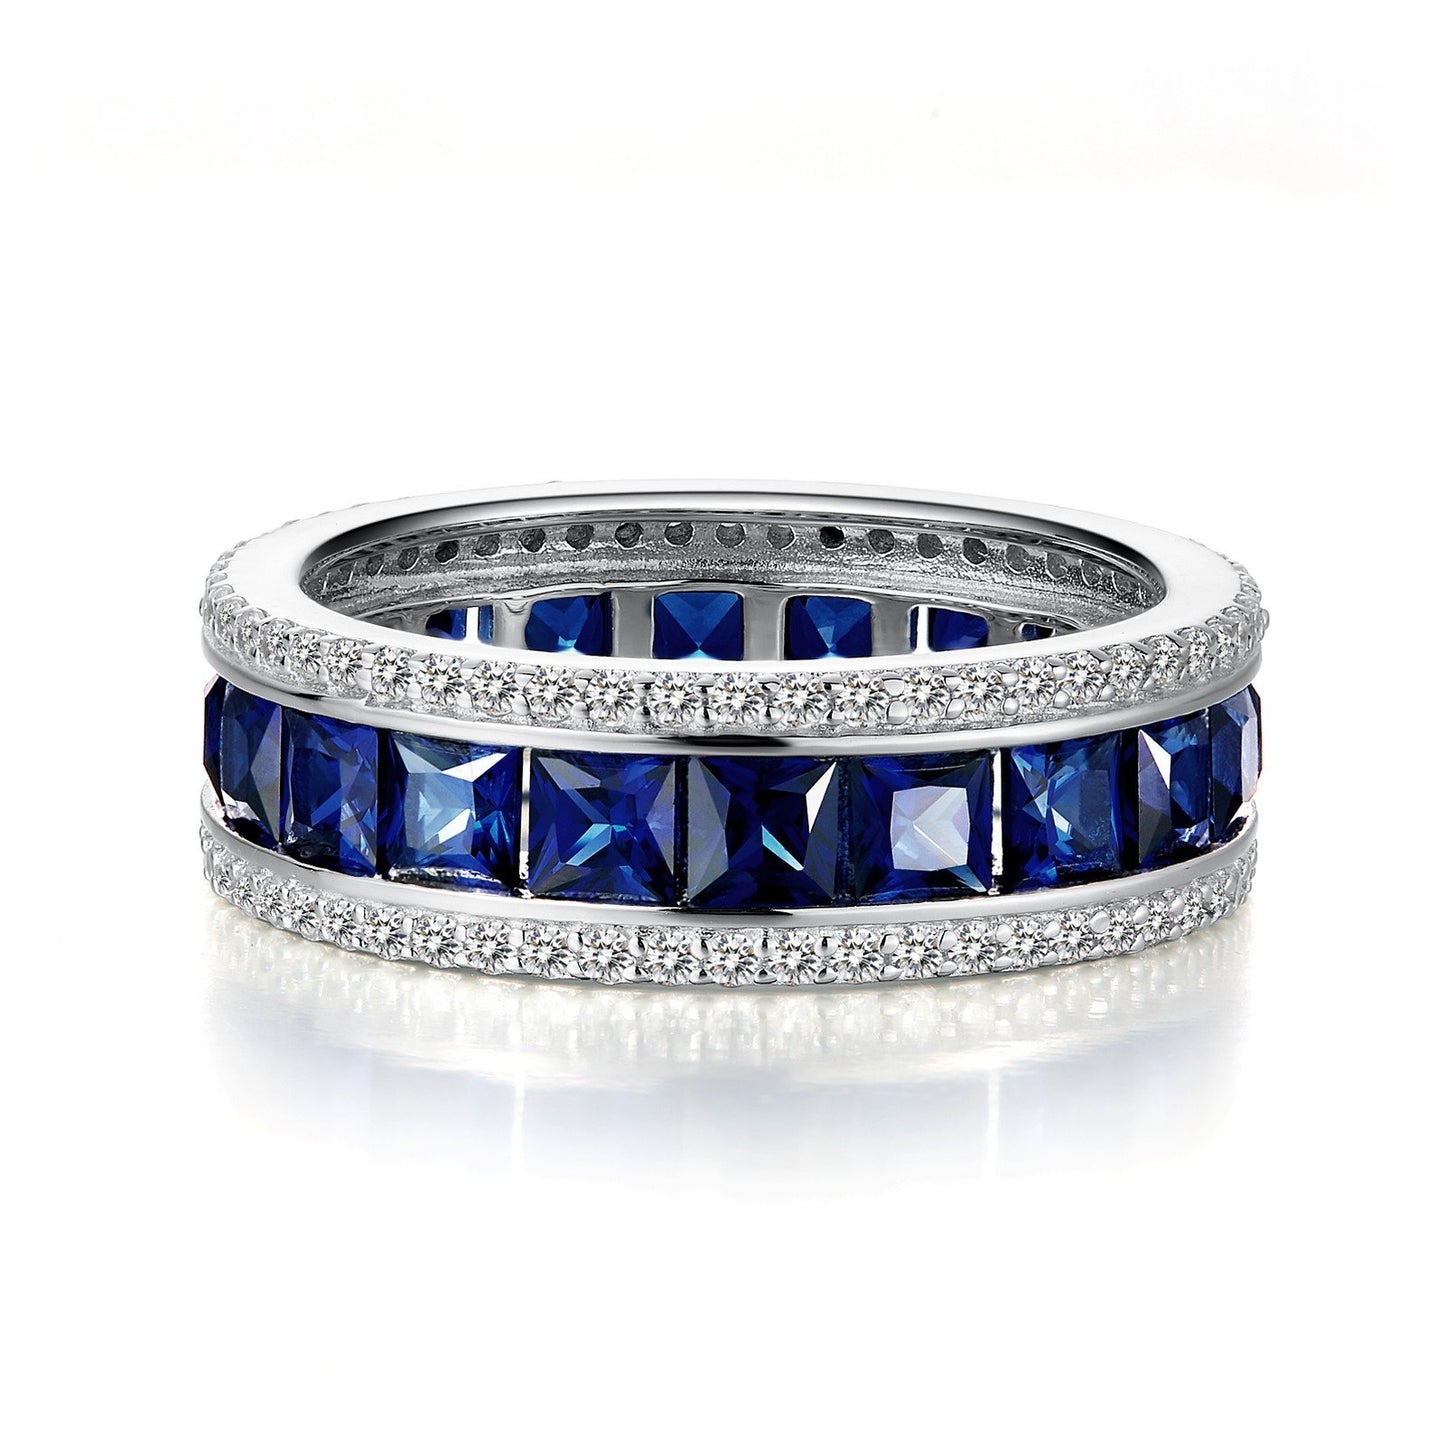 LaFonn Platinum Simulated Diamond and Sapphire N/A RINGS Vintage Inspired Eternity Band